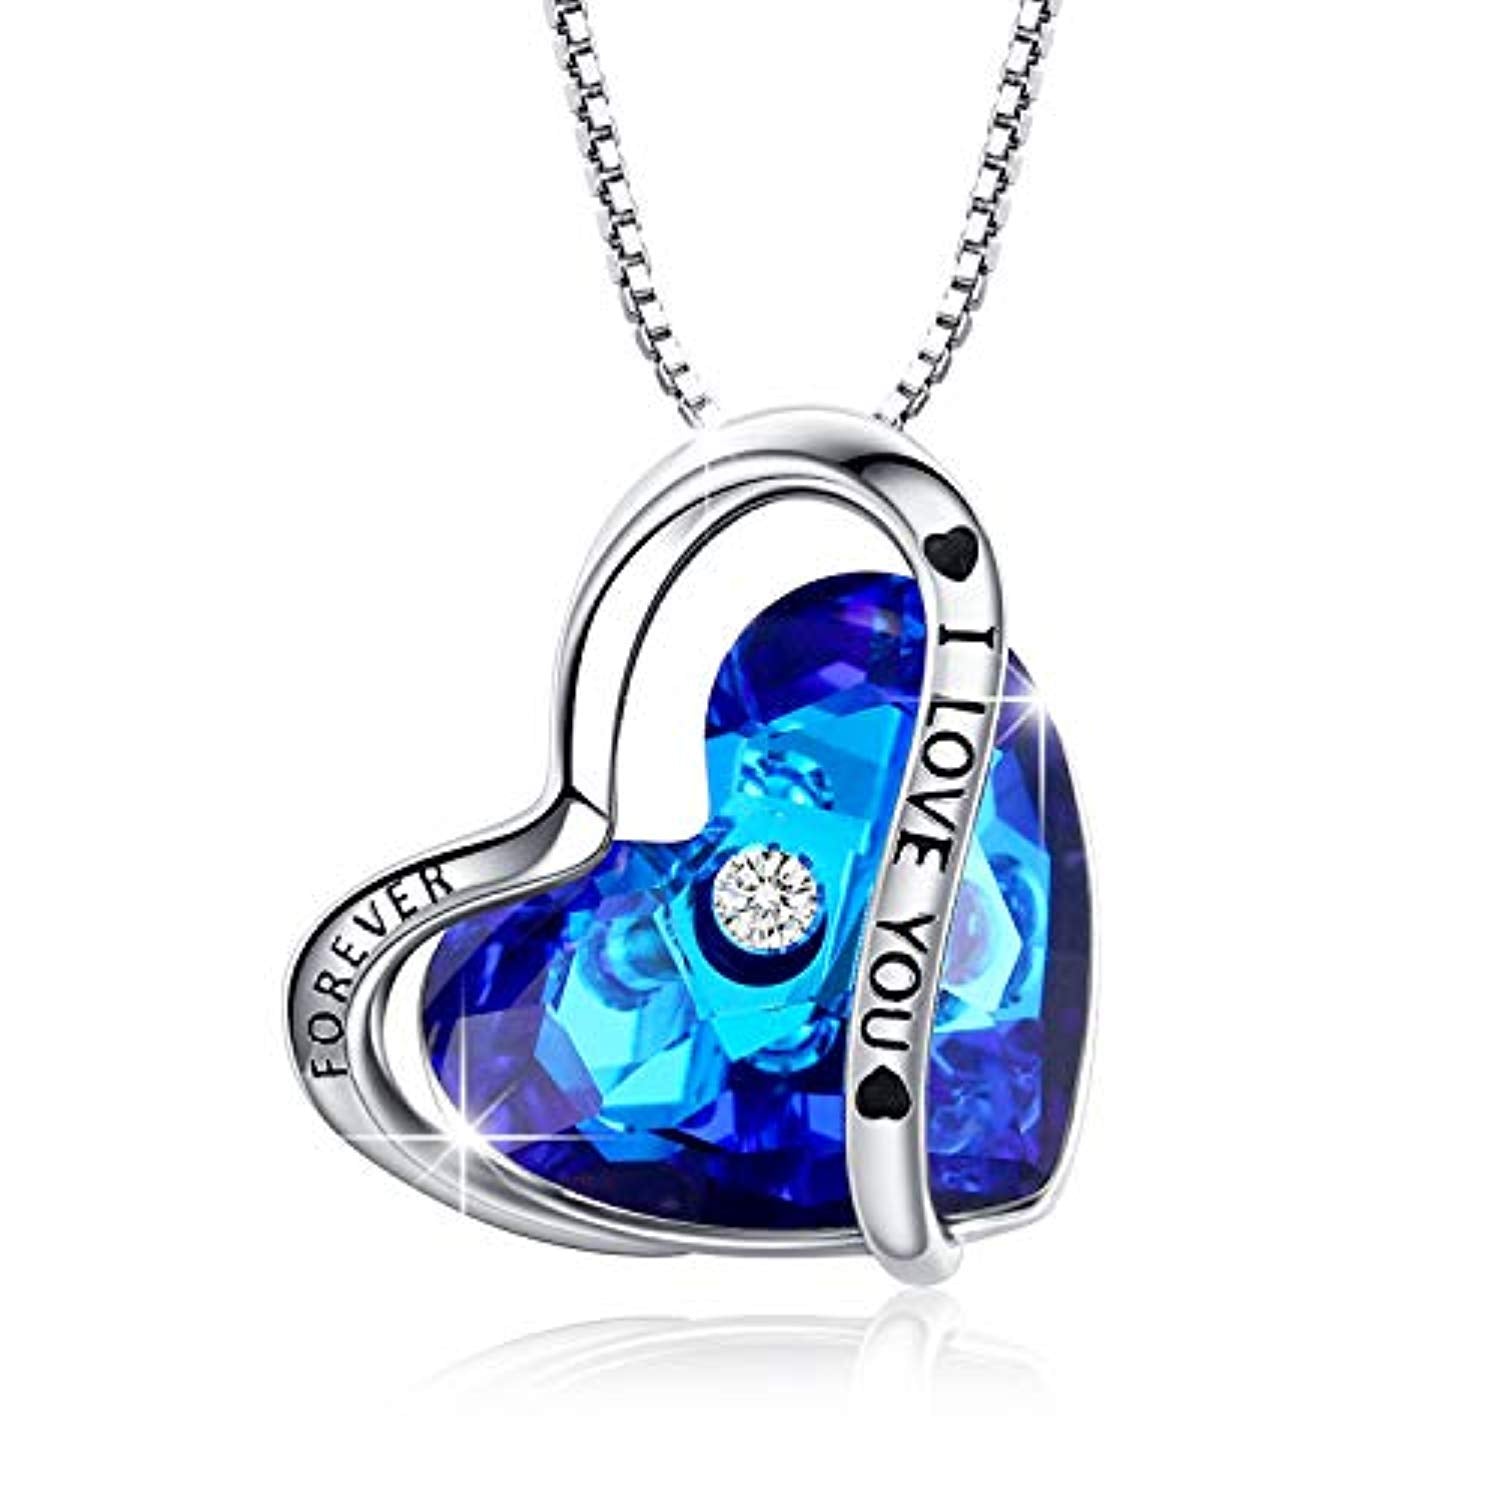 Buy Titanic Heart of the Ocean Necklace Pendant, Mega 55 Carat Blue Crystal  & 5A Cubic Zirconia, PROMOTION Free Earrings While Stocks Last. Online in  India - Etsy